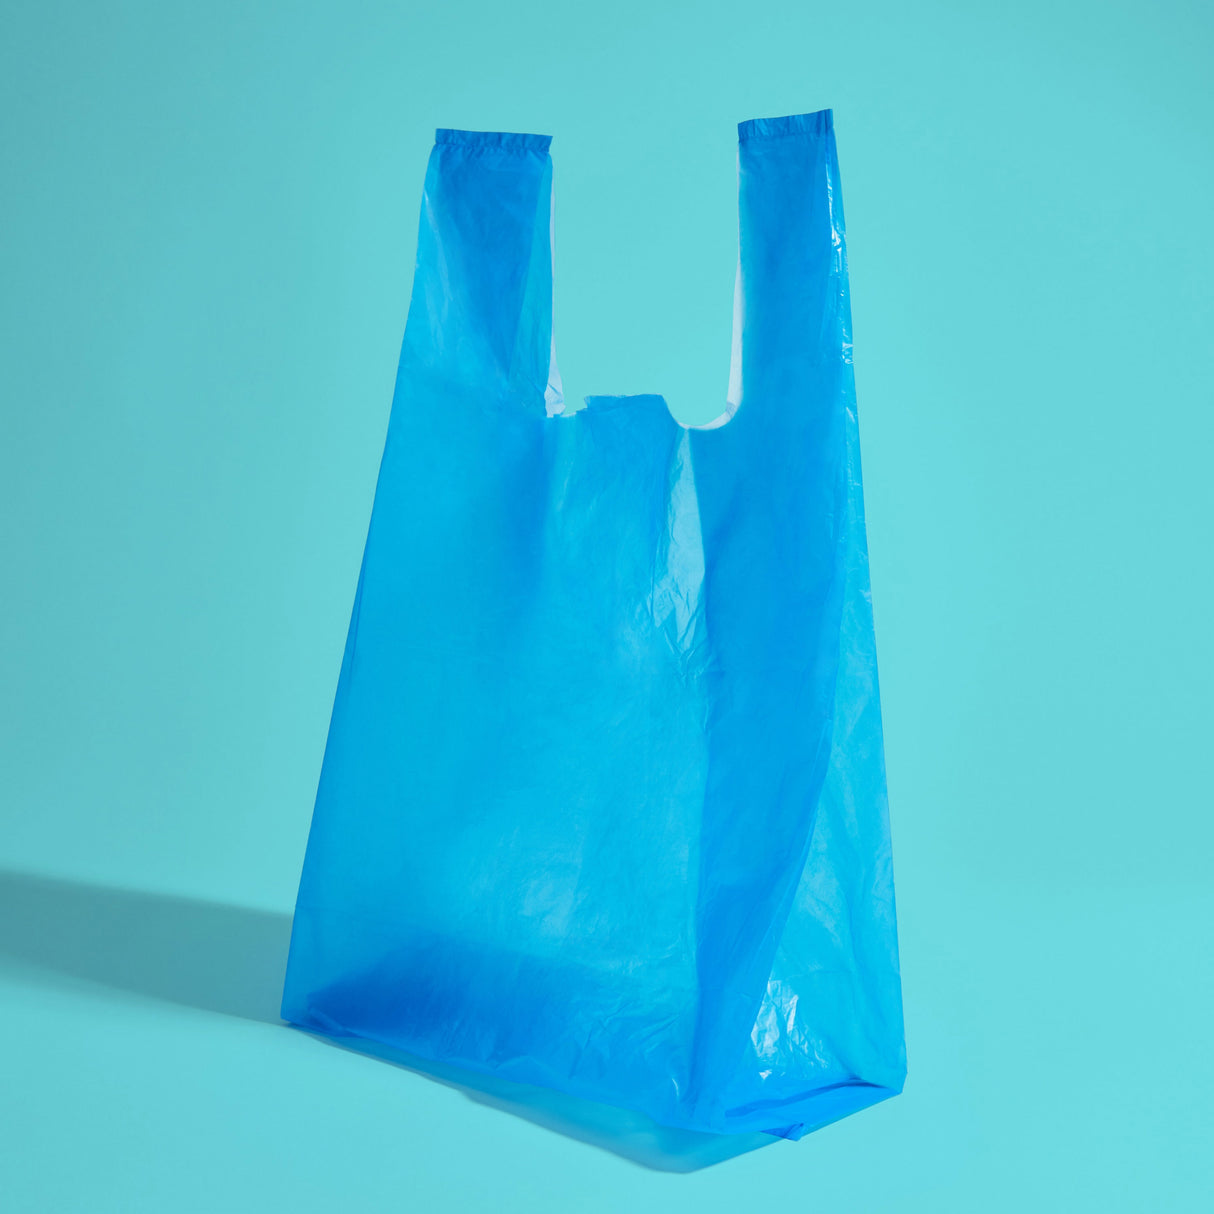 A blue translucent biodegradable bag with handles that easily tie